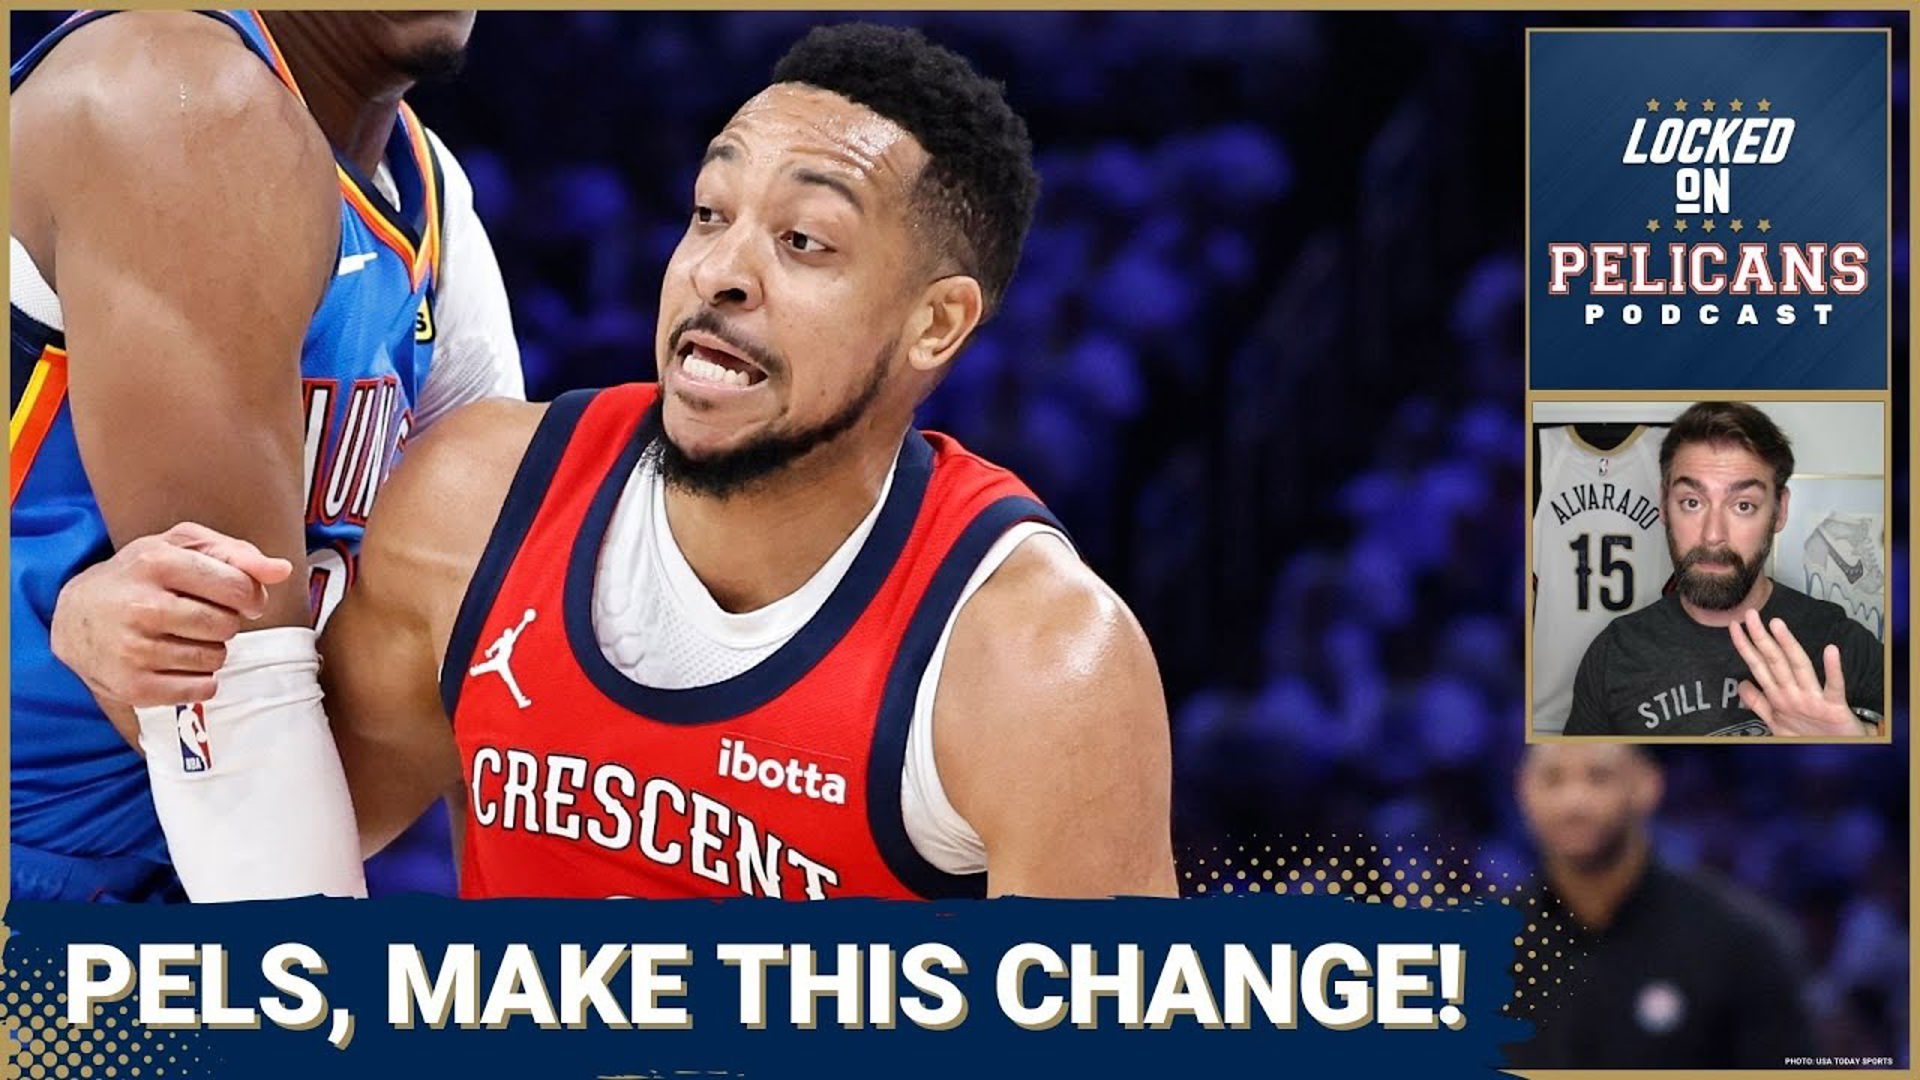 If the New Orleans Pelicans want to try and even up their first round playoff series with the Oklahoma City Thunder they need to make 3 big changes.